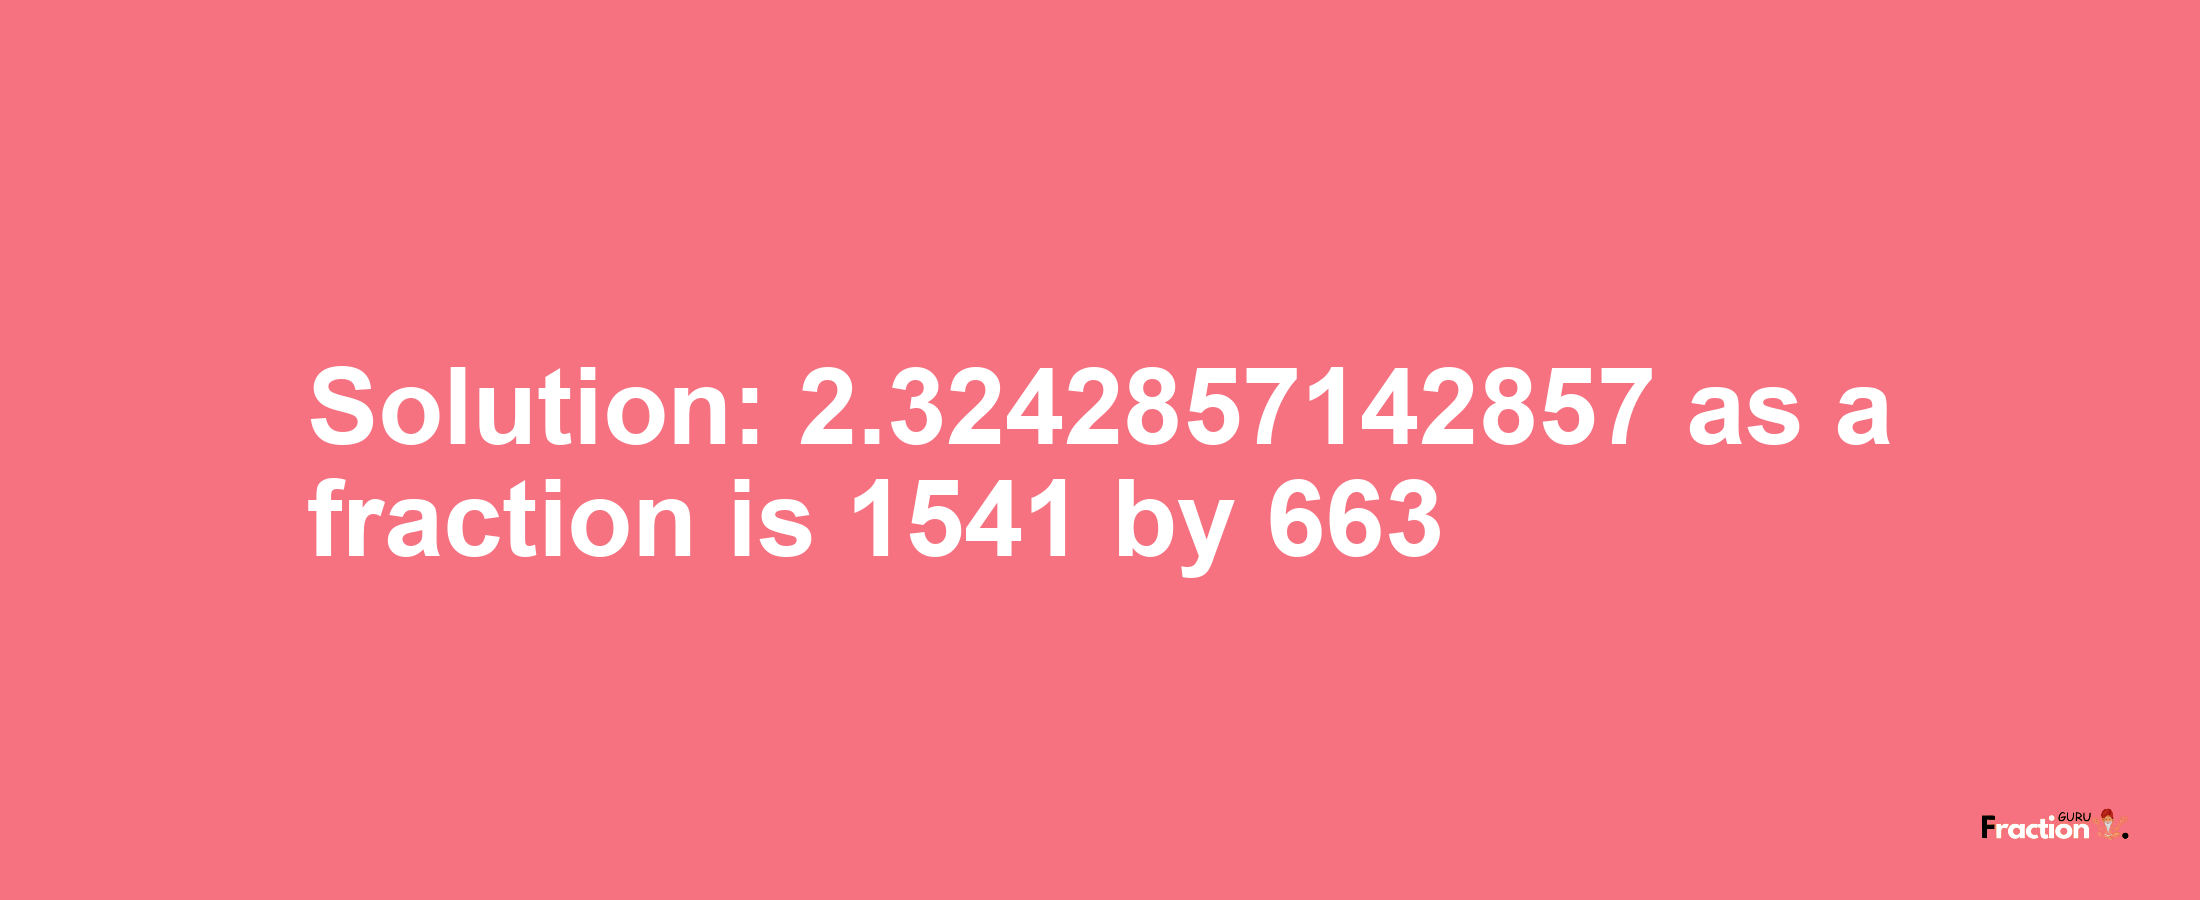 Solution:2.3242857142857 as a fraction is 1541/663